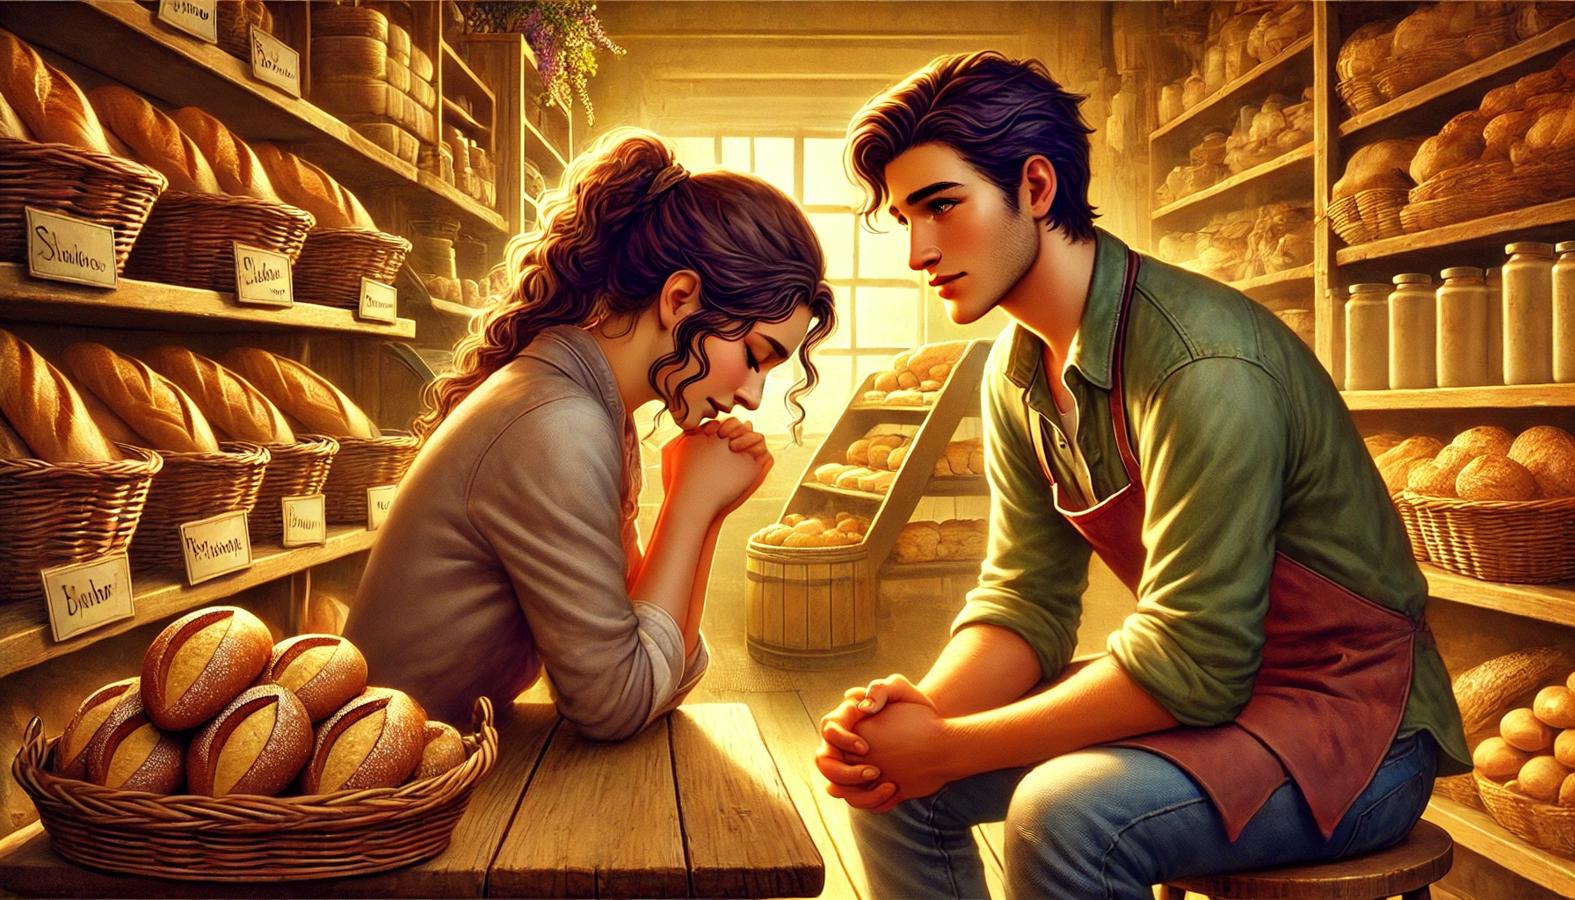 Ethan confessing his past to Lila in a cozy bakery.